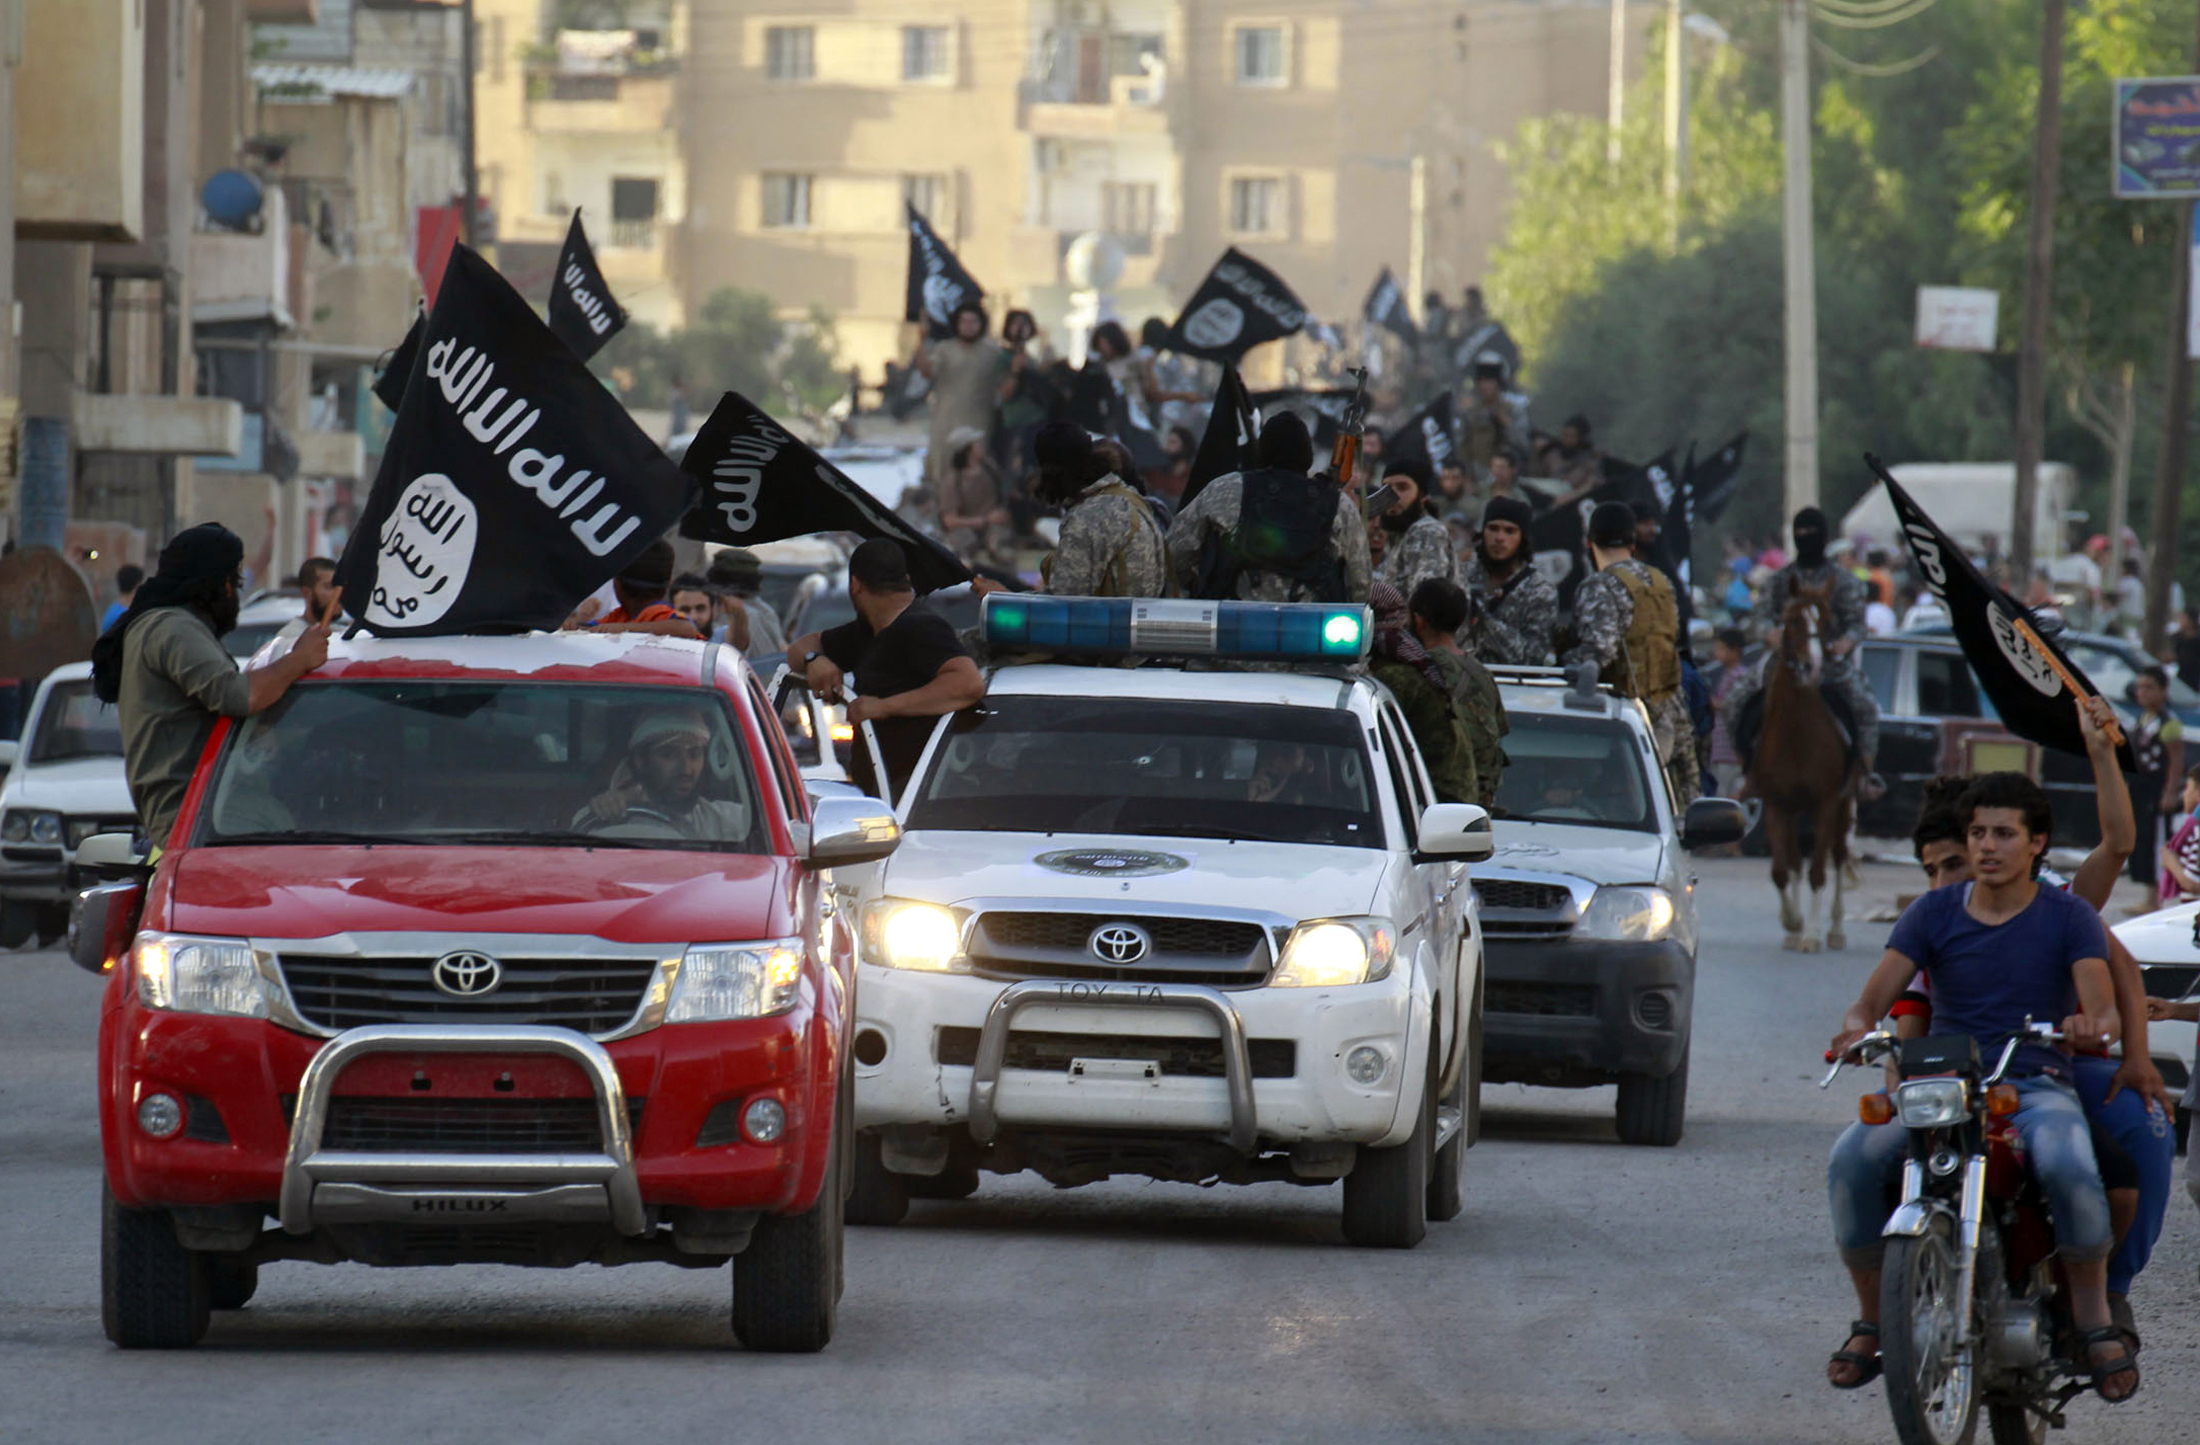  Militant Daesh fighters wave flags while attending a parade in Raqqa, Syria, June 30 2014